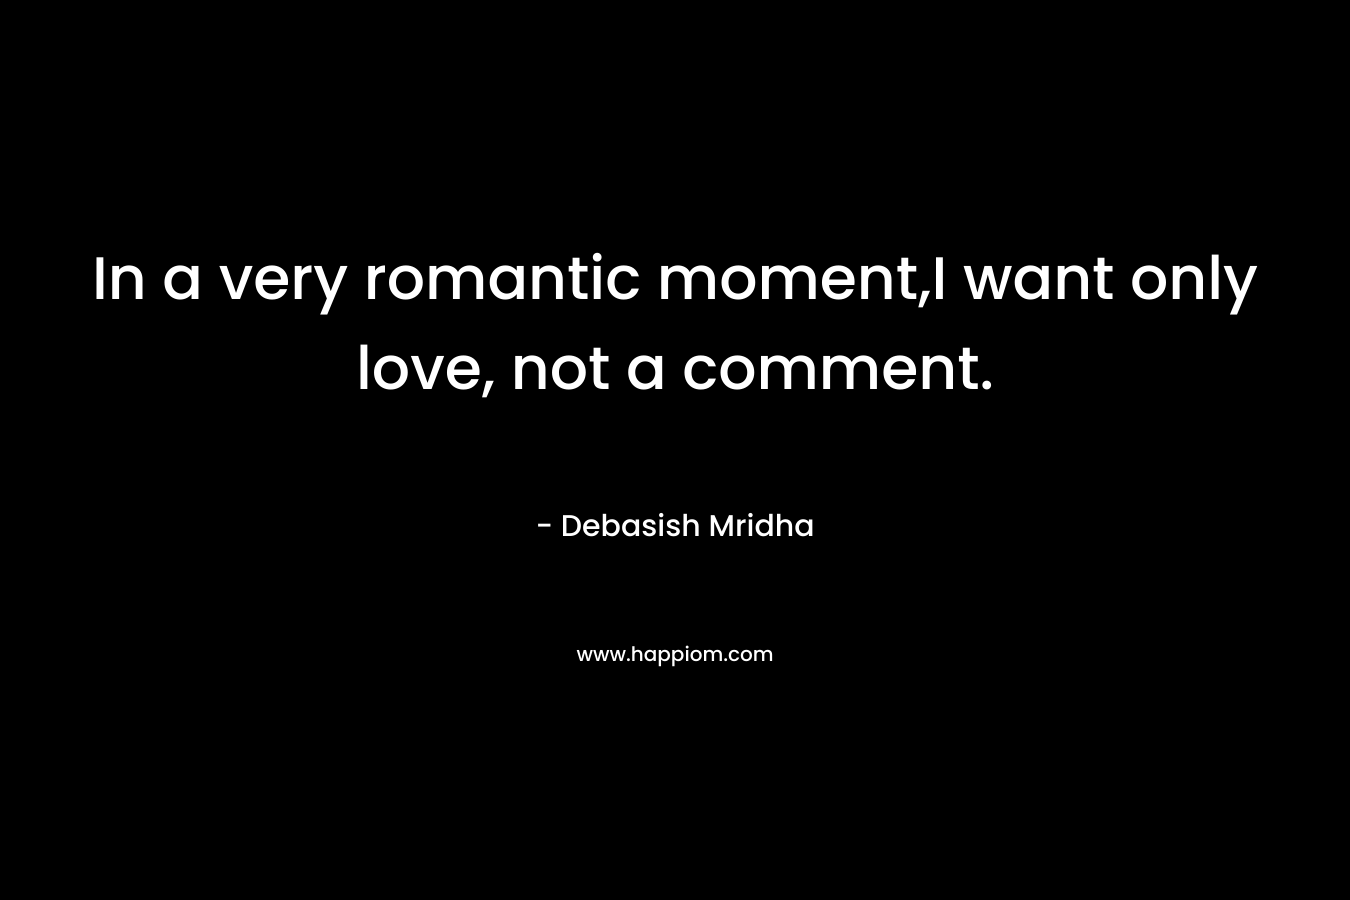 In a very romantic moment,I want only love, not a comment.